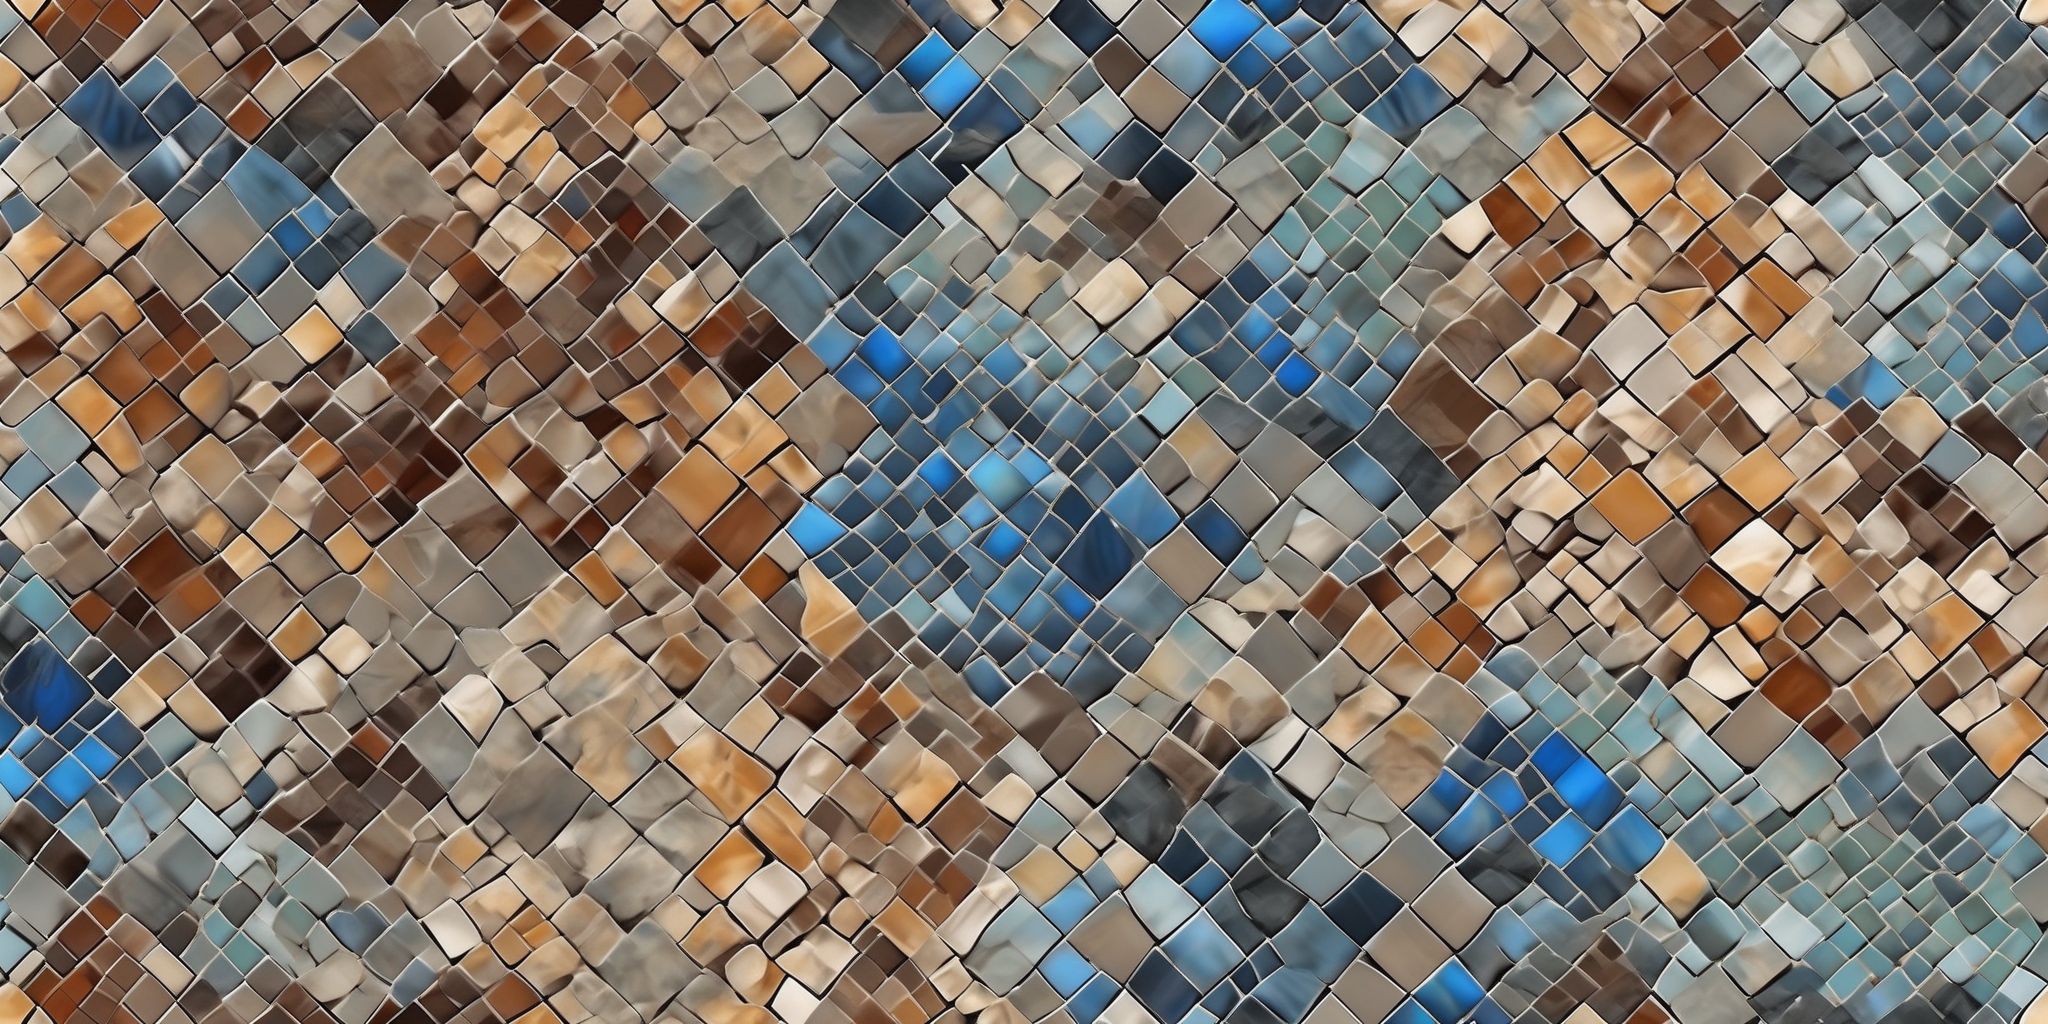 Mosaic  in realistic, photographic style